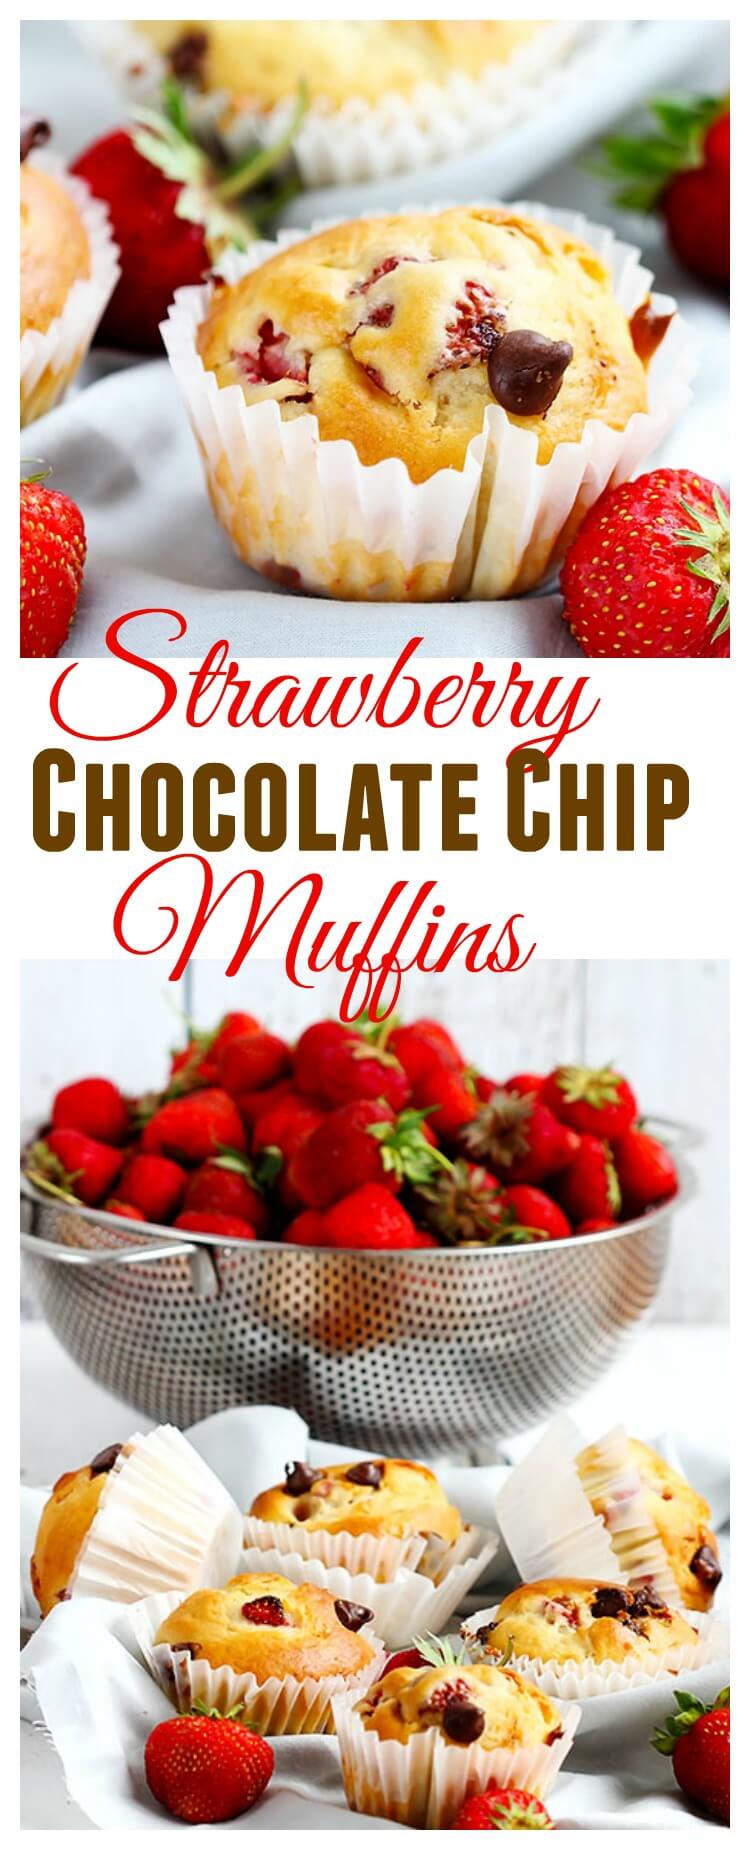 Strawberry Chocolate Chip Muffins - Fluffy, soft chocolate chip muffins studded with fresh strawberries. Perfect in season as breakfast or dessert. Made with Greek yogurt the whole family is sure to love these!